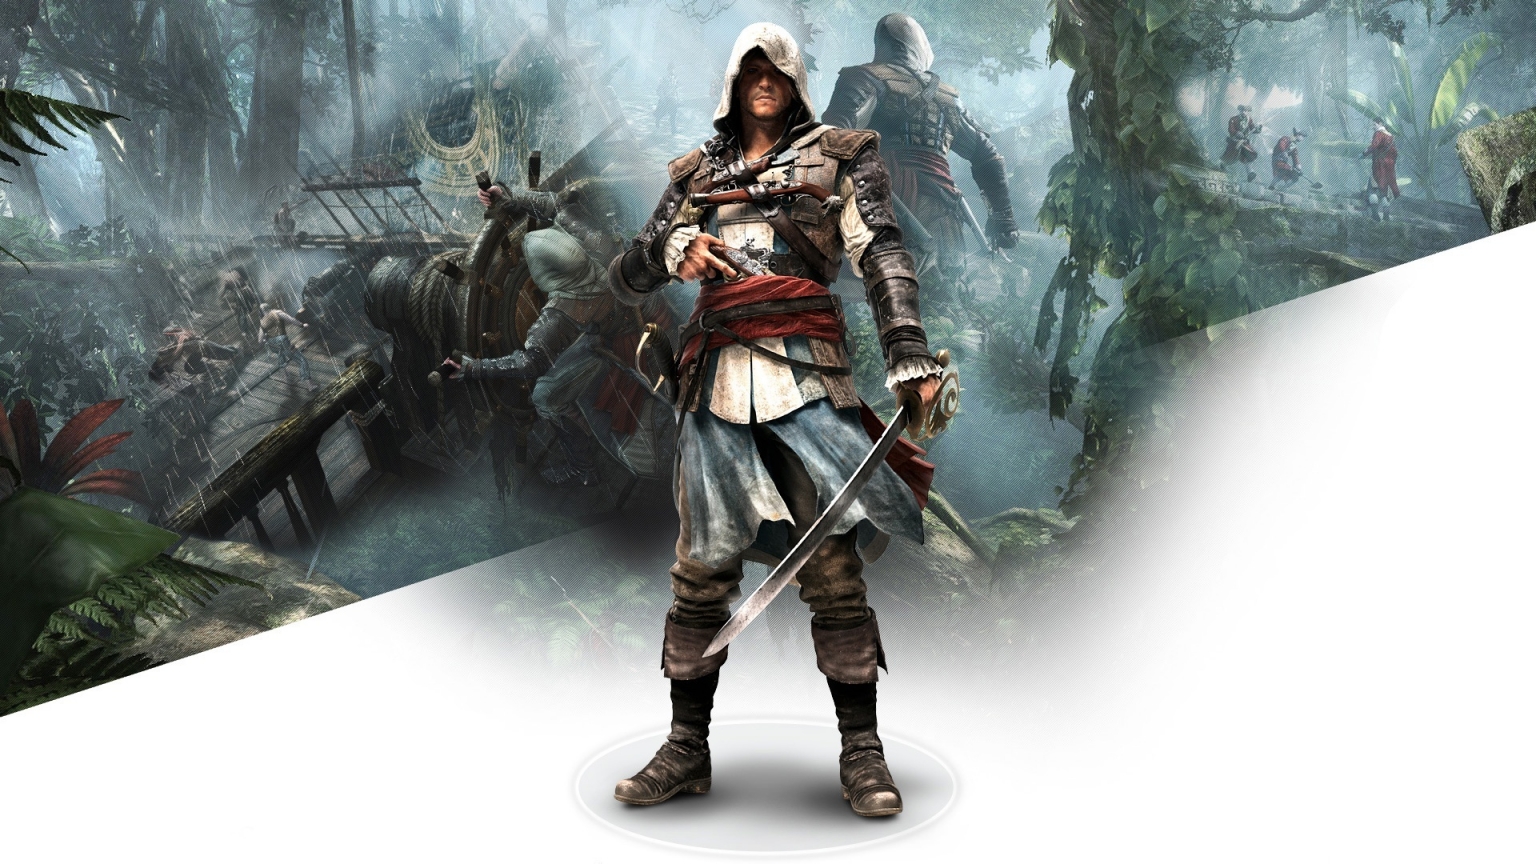 Assassins Creed 4 for 1536 x 864 HDTV resolution